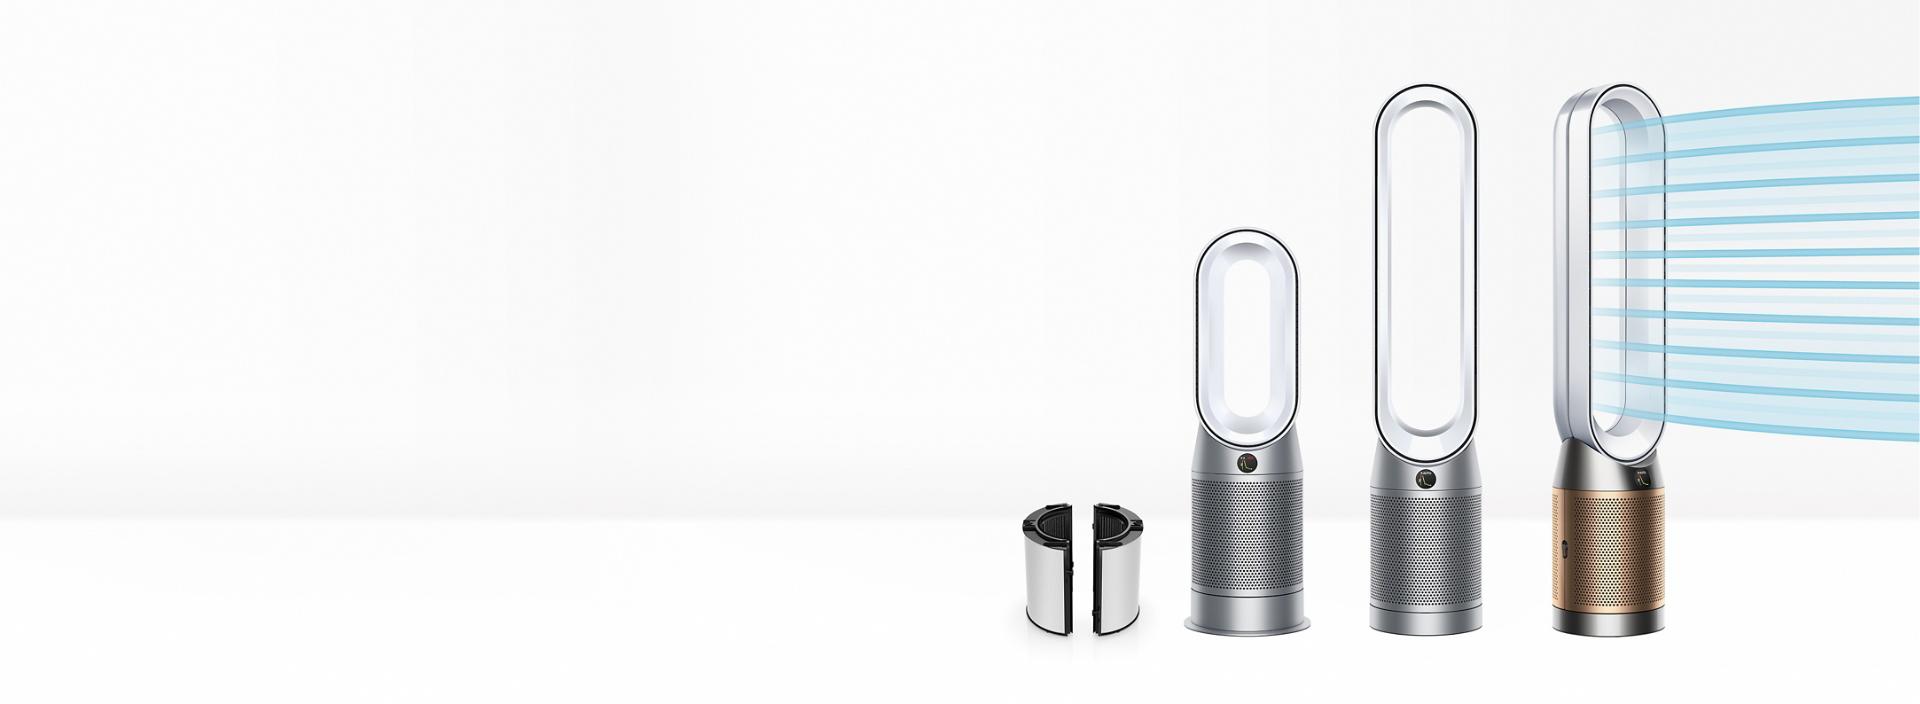 Range of Dyson air purifiers